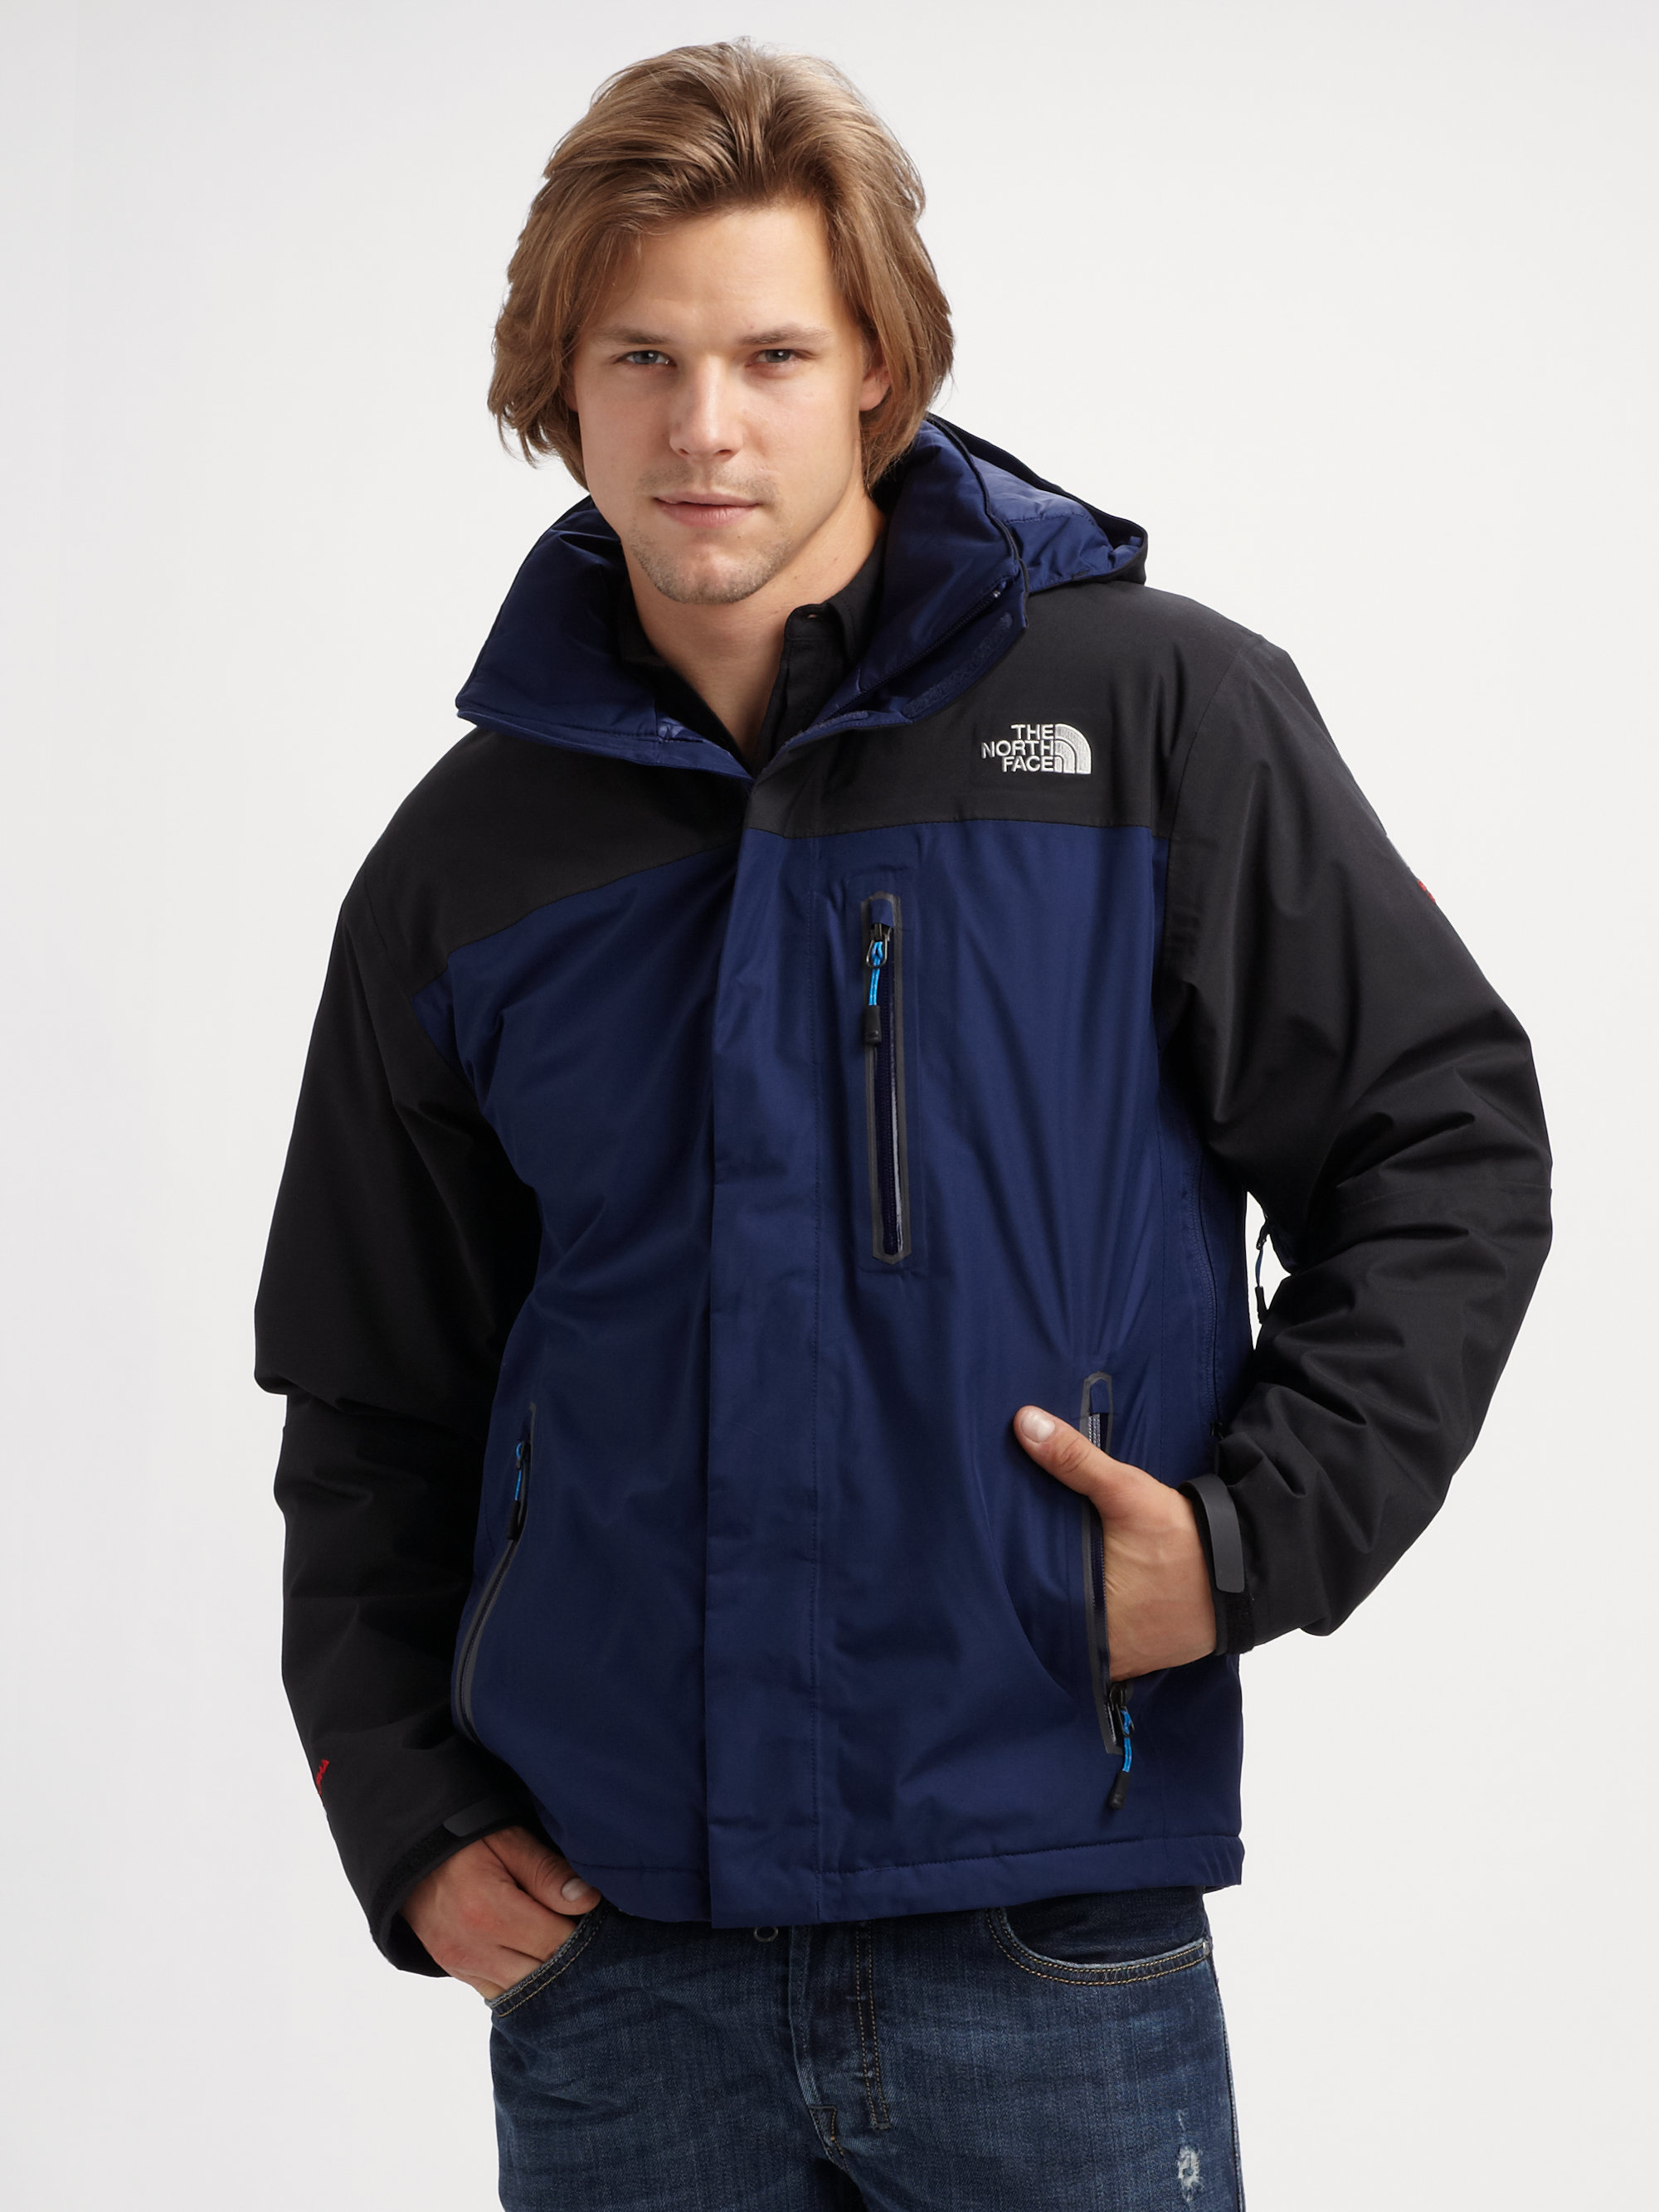 Lyst - The North Face Plasma Thermal Jacket in Blue for Men